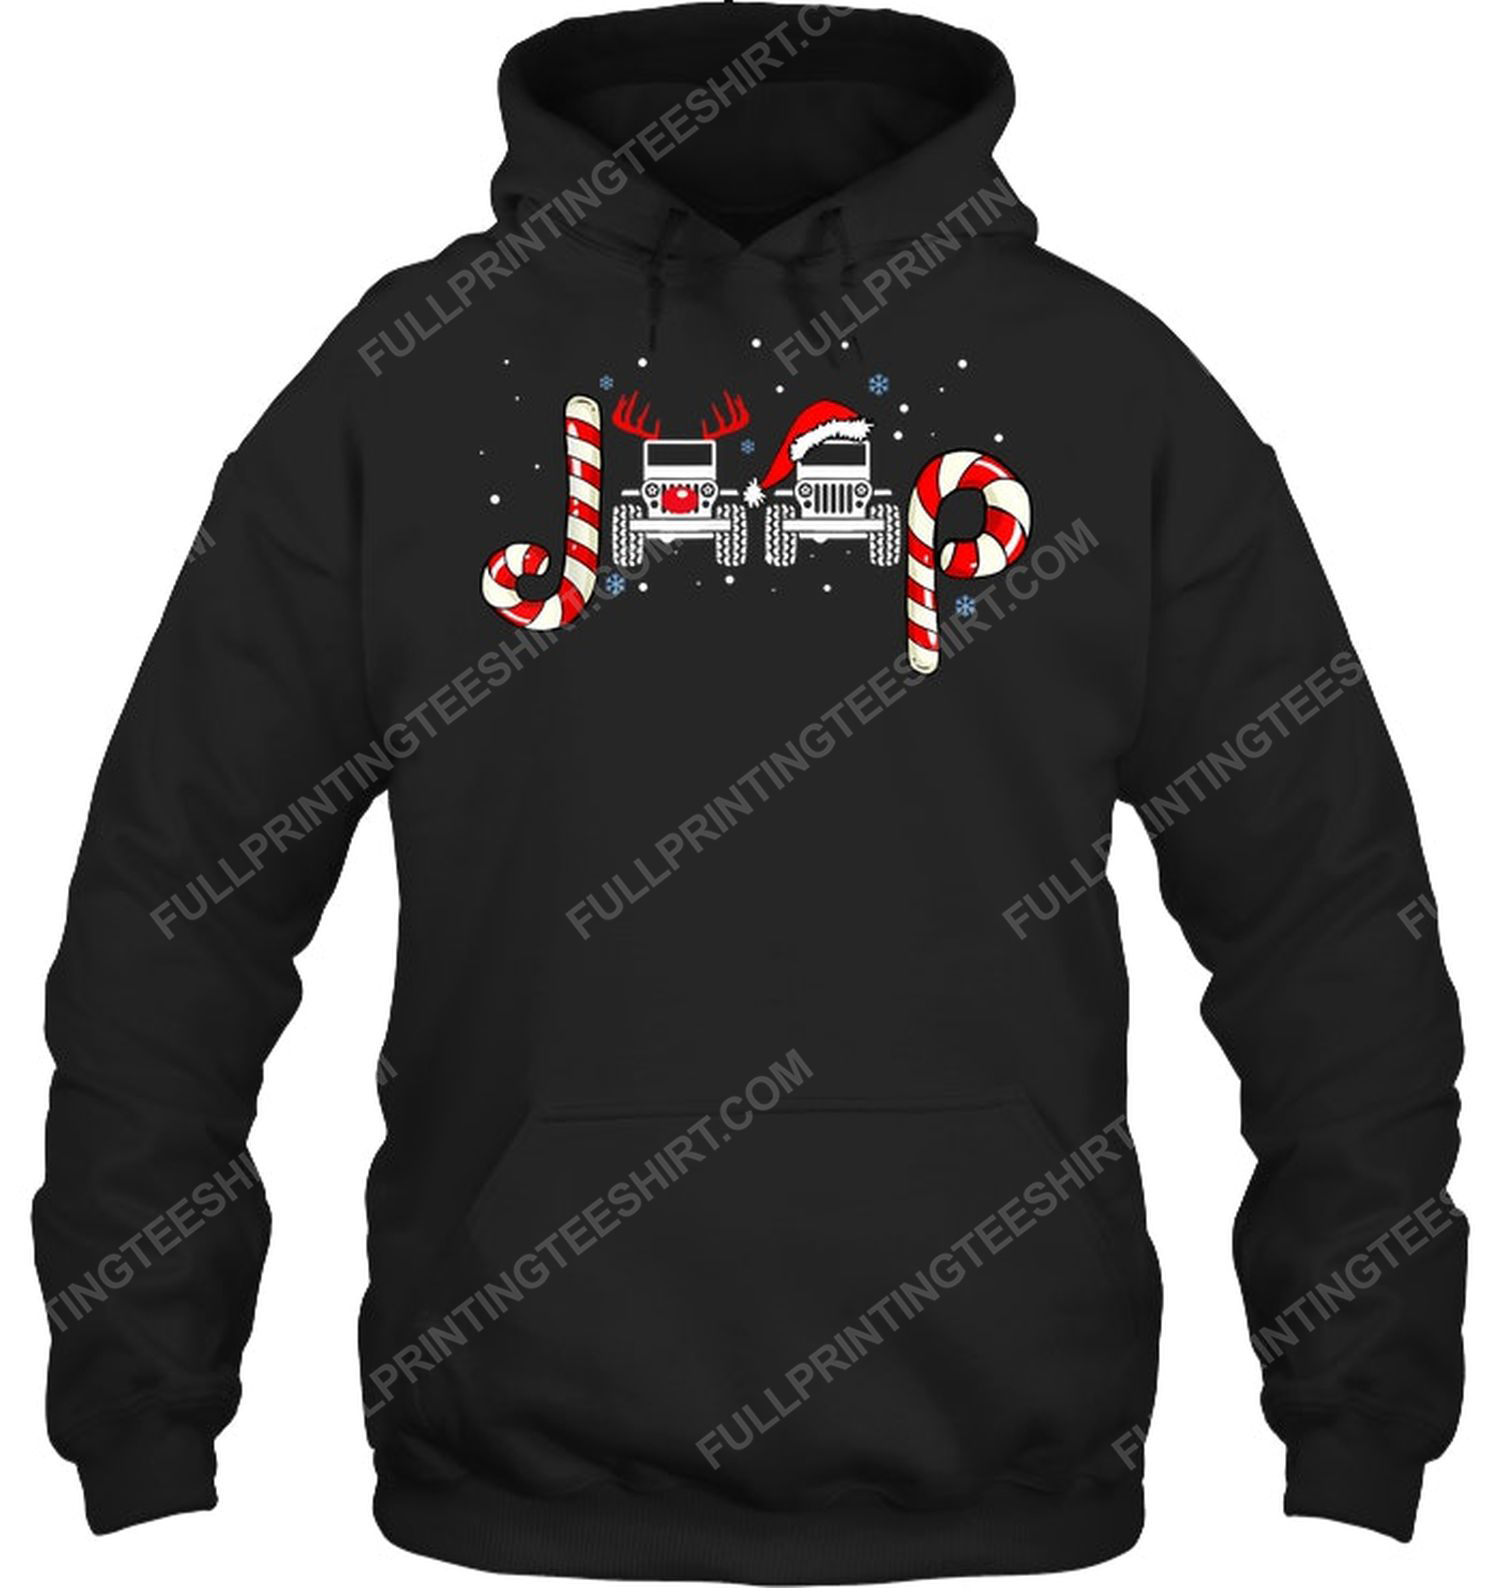 Christmas time jeep car and candy cane hoodie